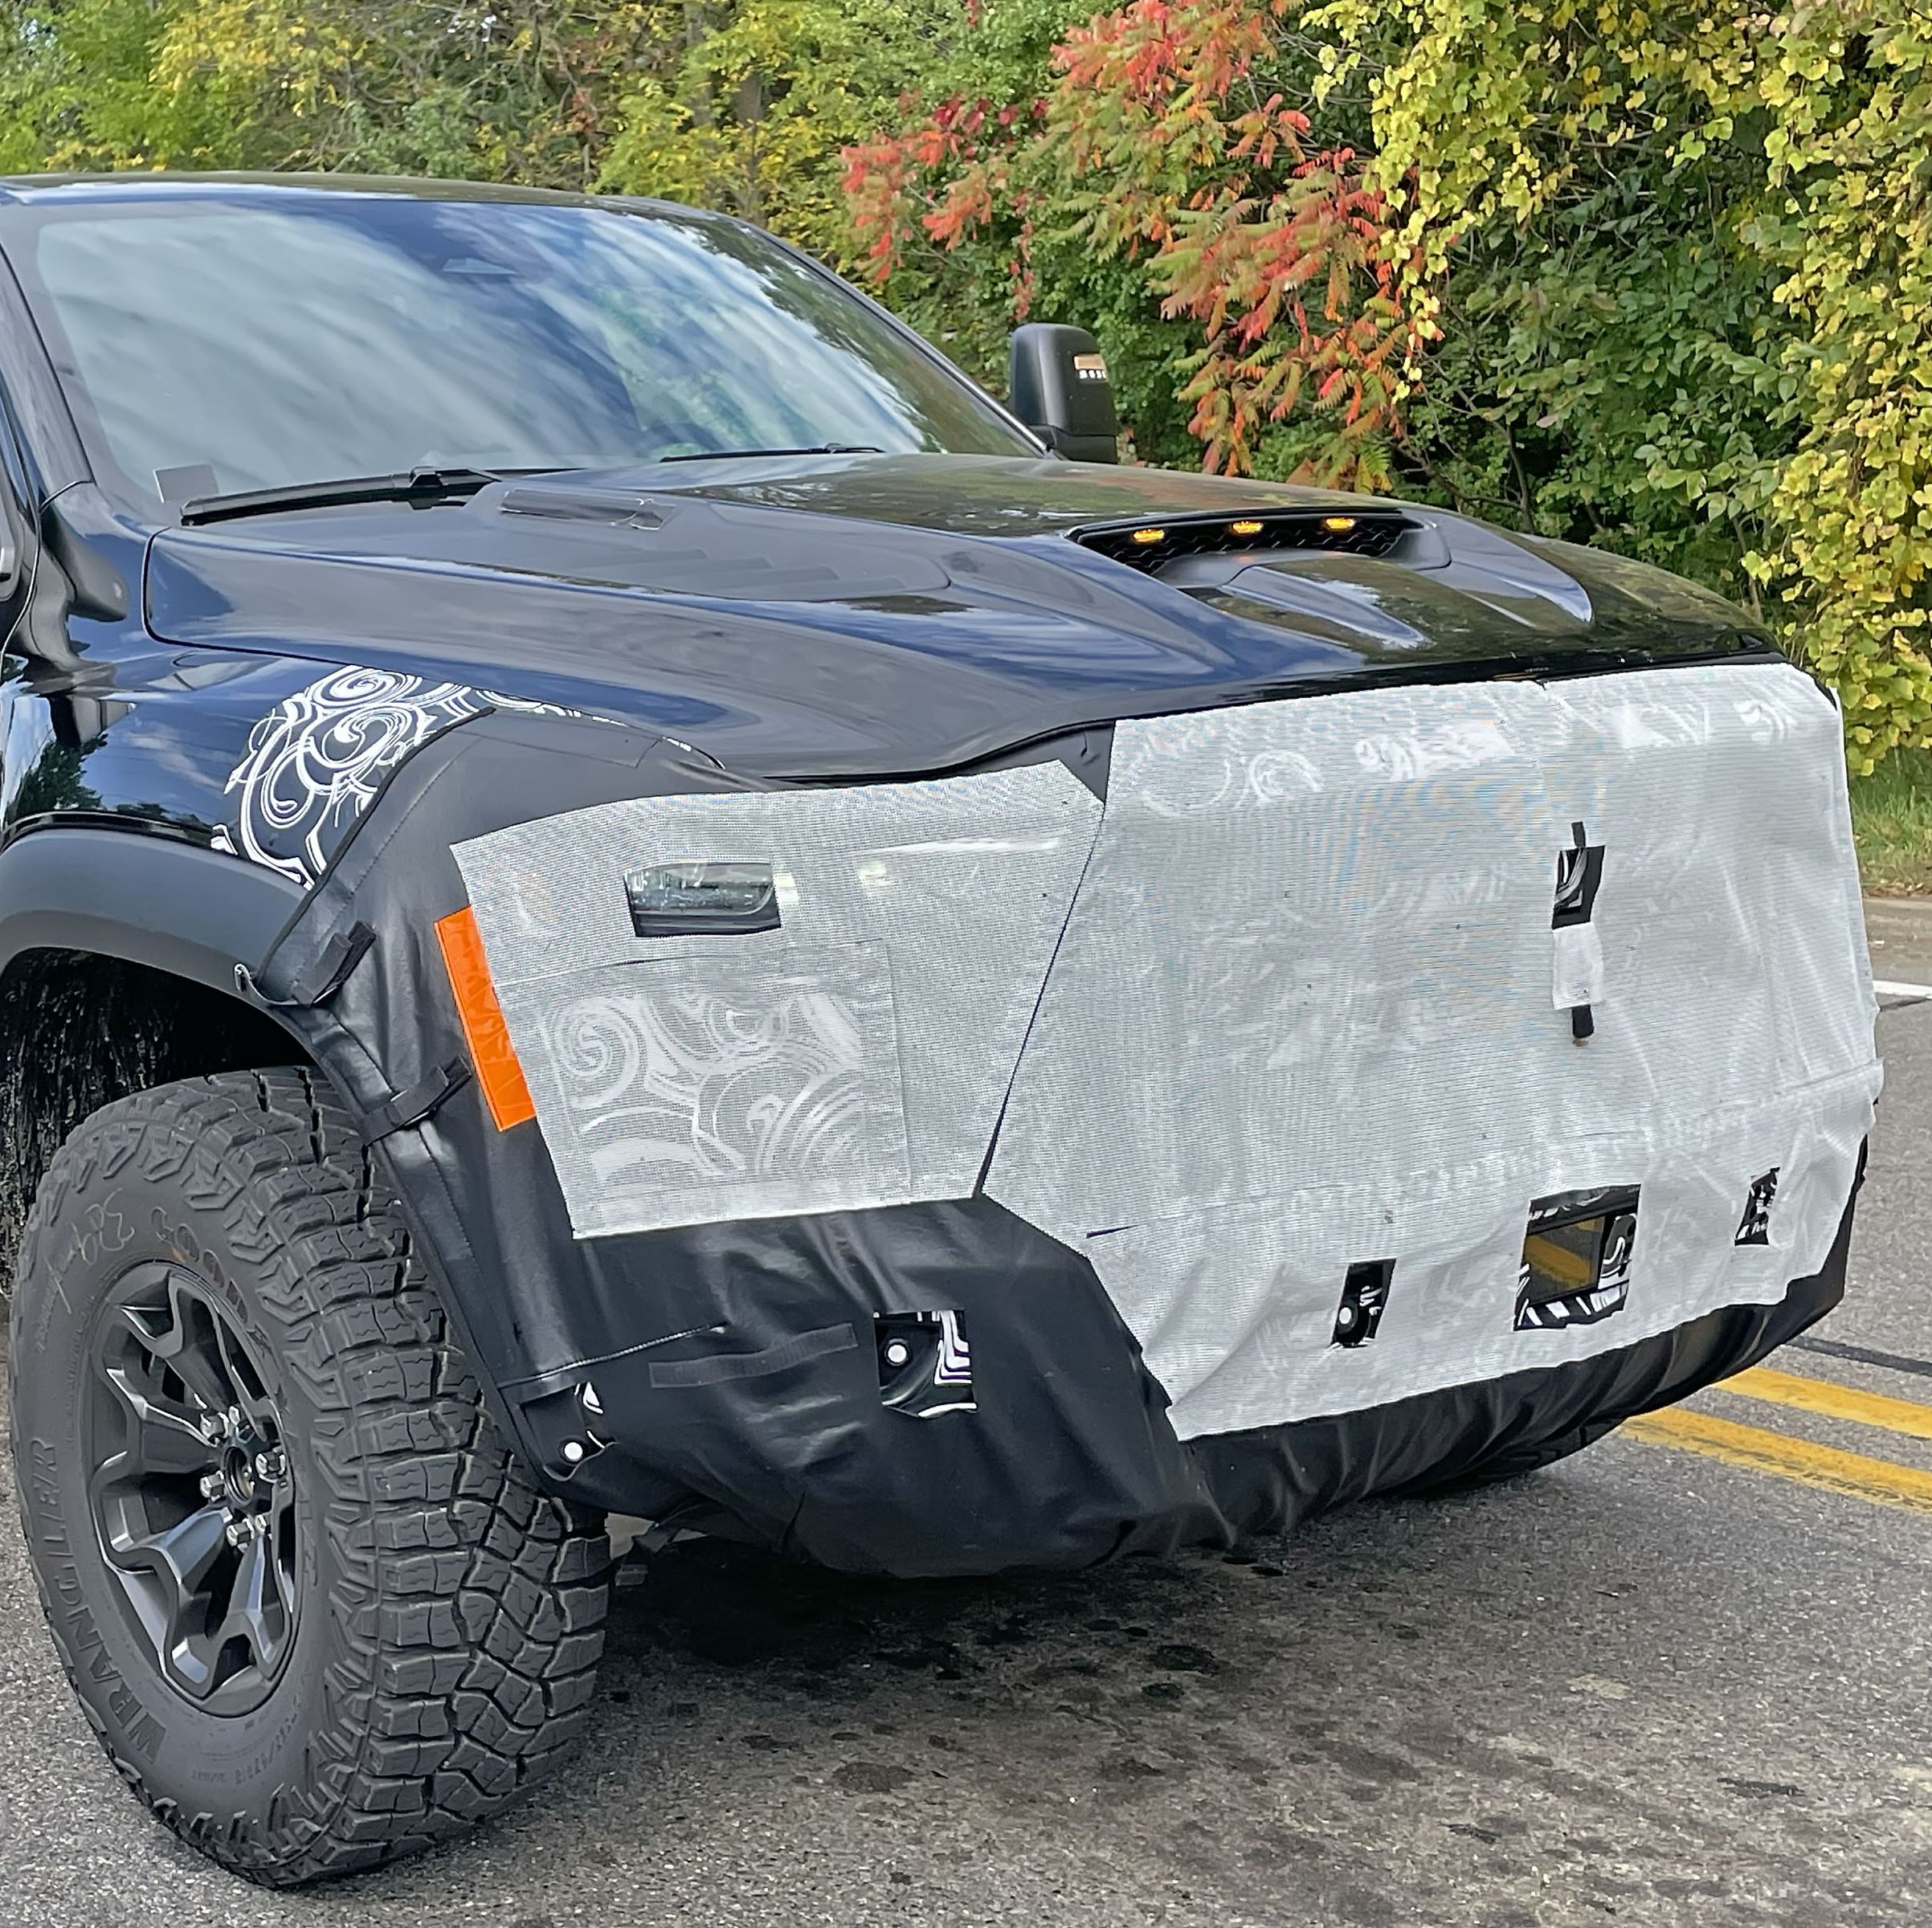 Is This the New Twin-Turbo Inline-Six Ram TRX?